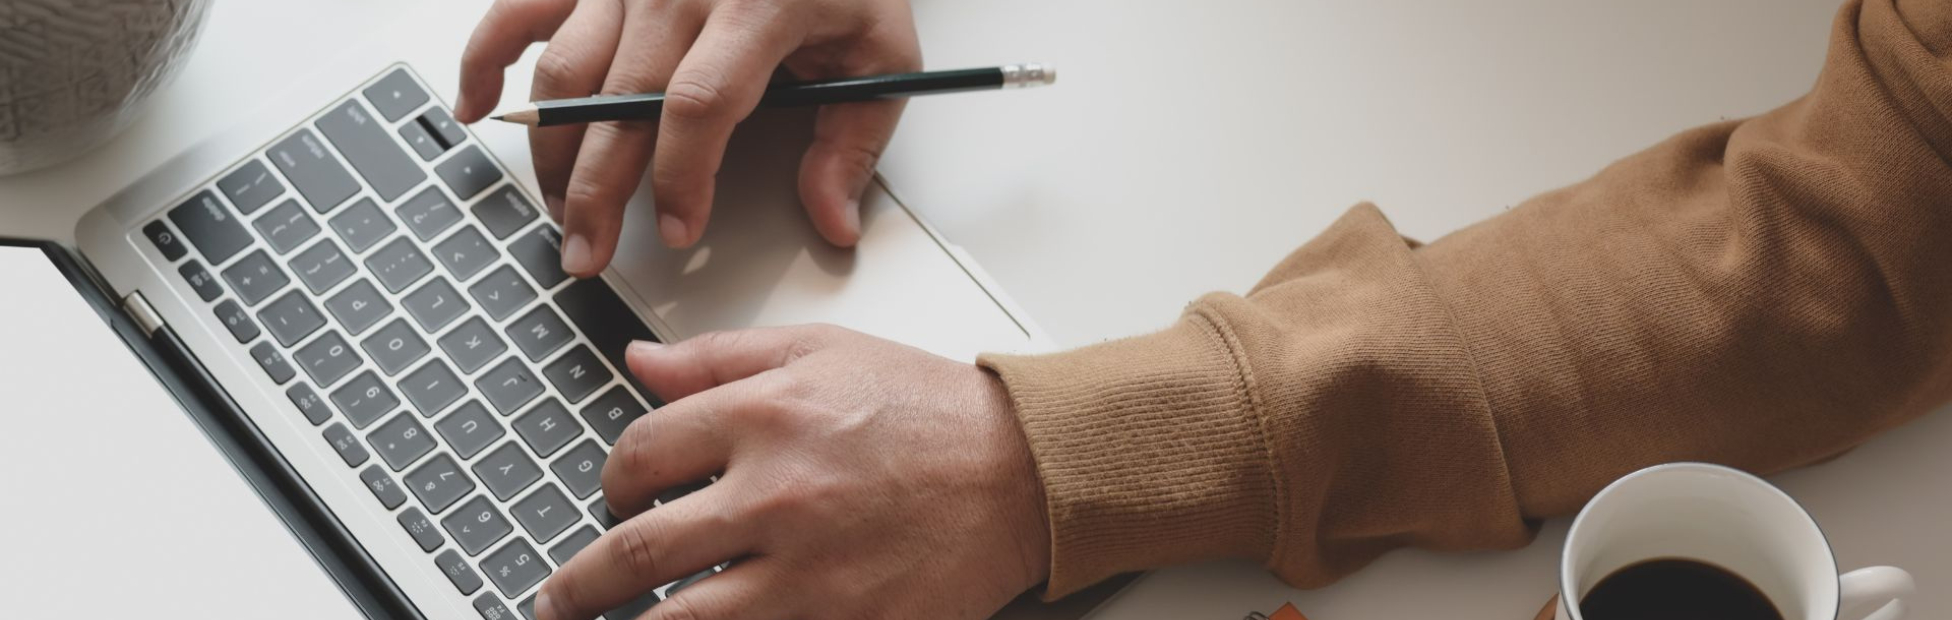 A hand holding a pencil while navigating the mouse pad on the laptop